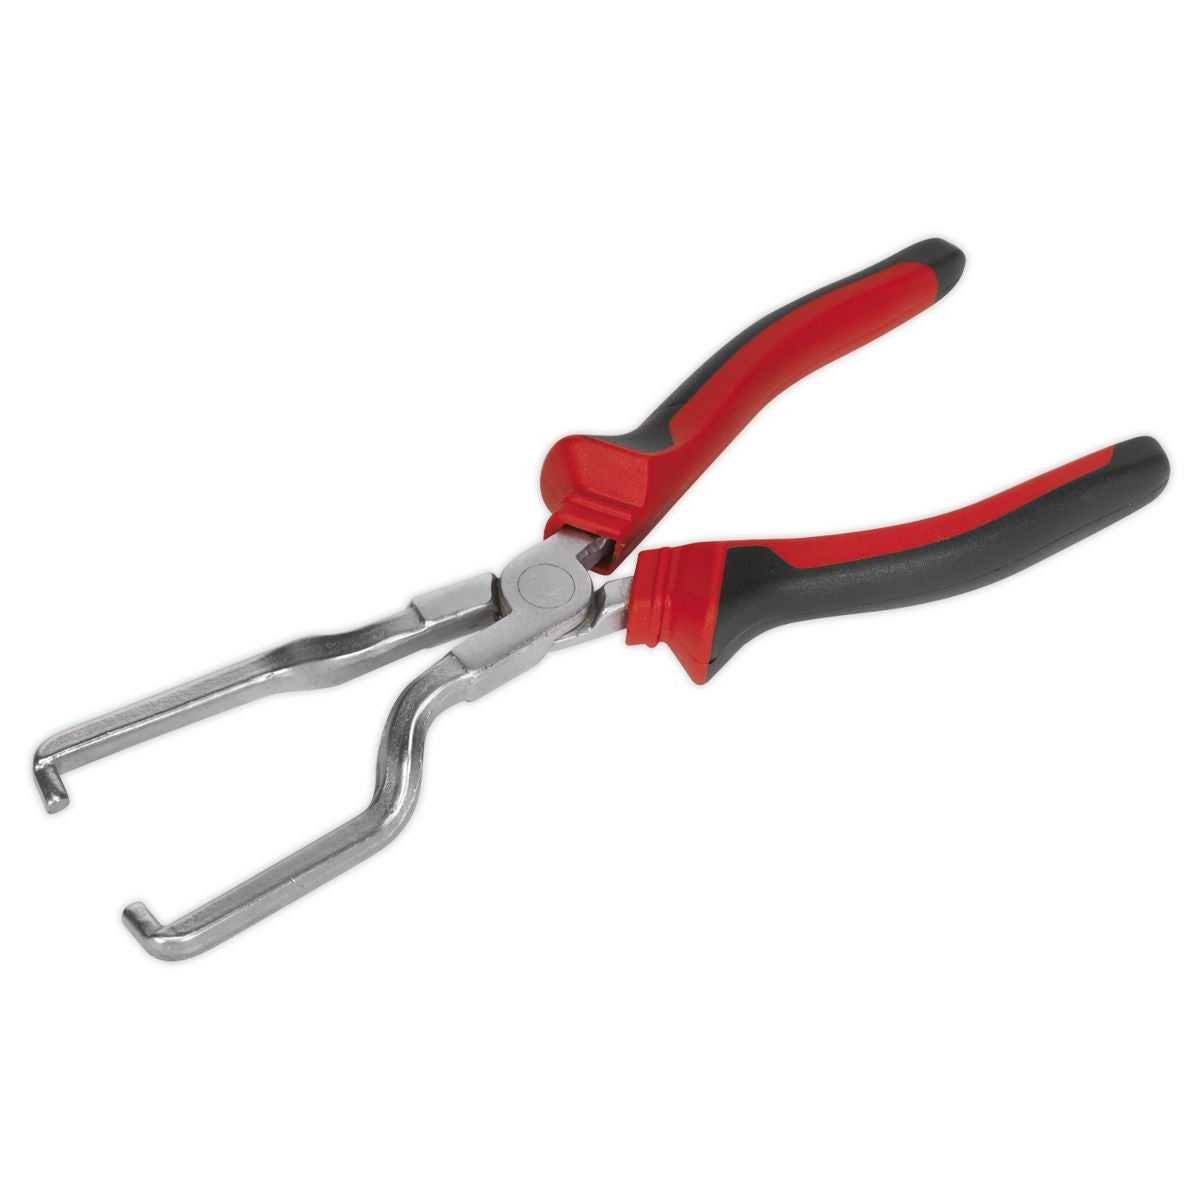 Sealey Fuel Feed Pipe Pliers